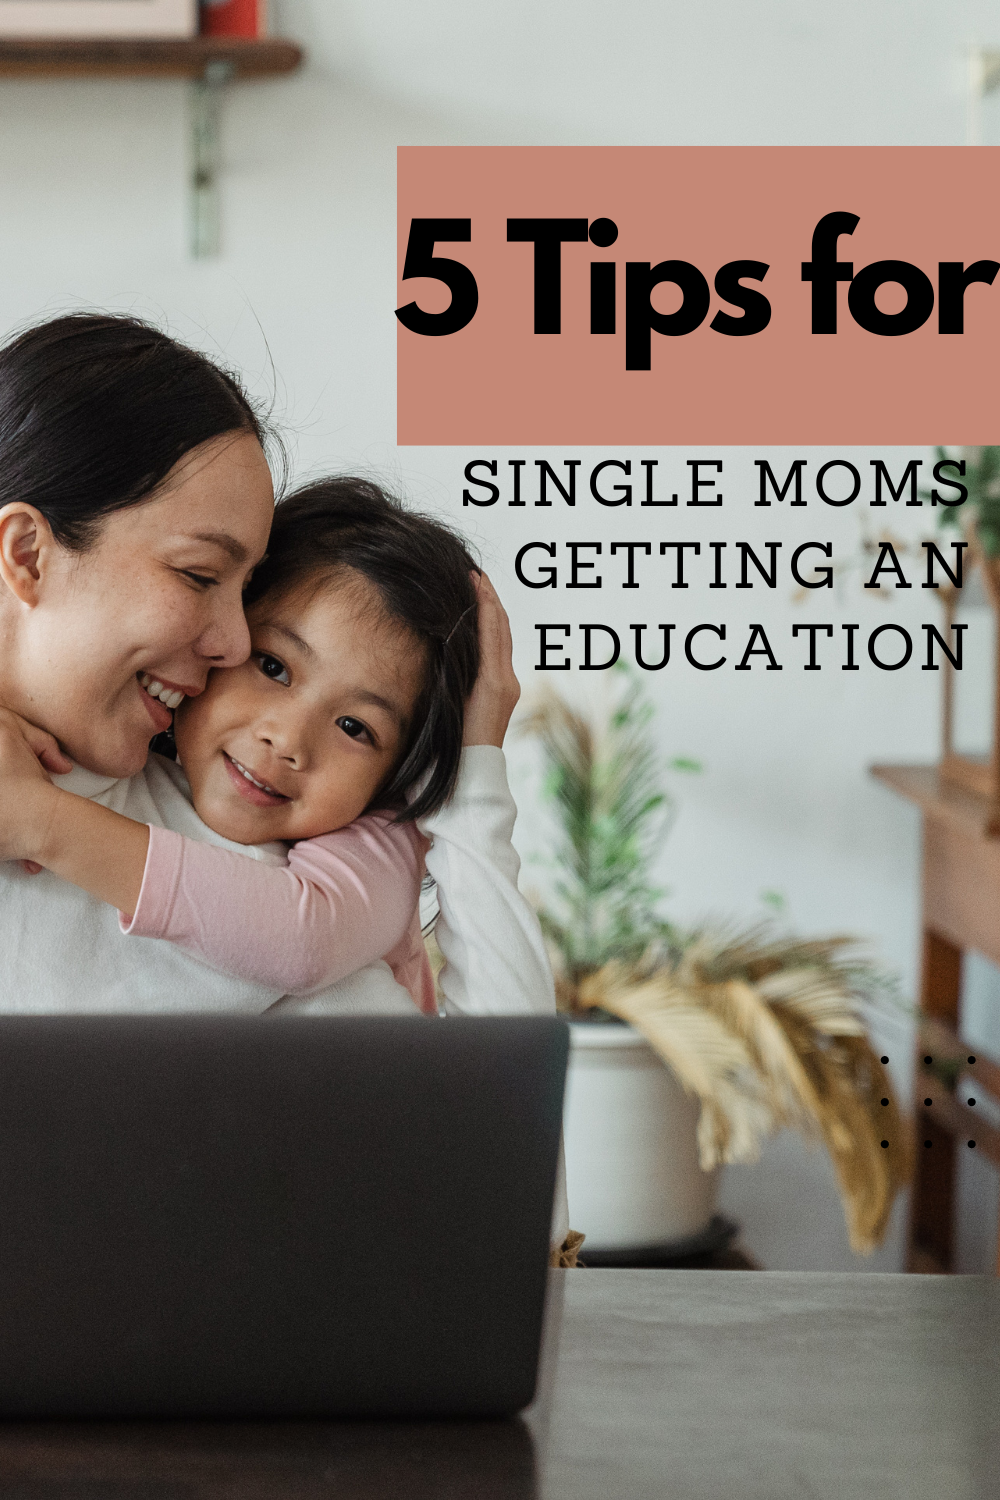 If you’re planning to go back to school and you’re a single mom, here are some opportunities and resources to consider.